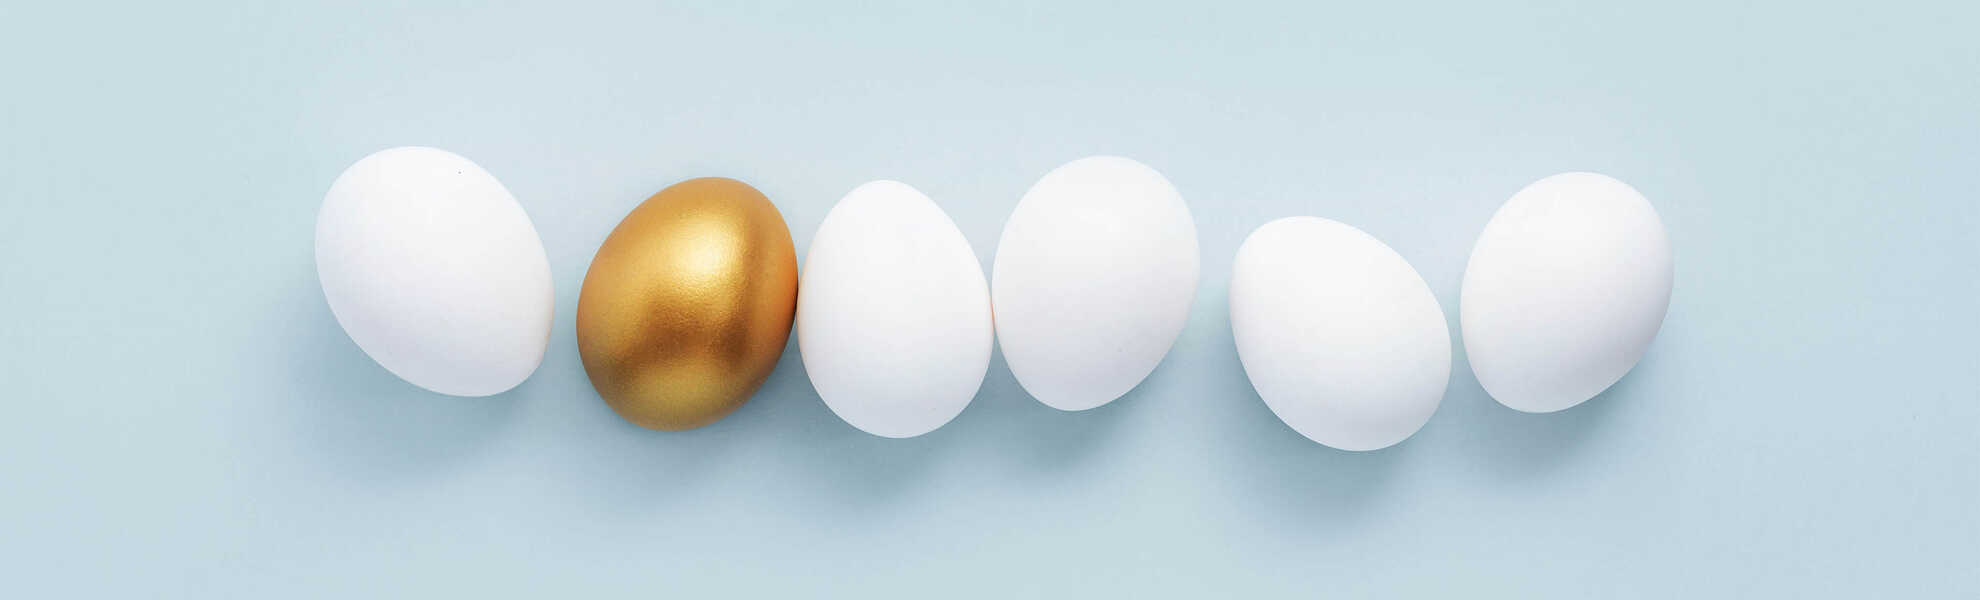 a set of white eggs with one golden egg